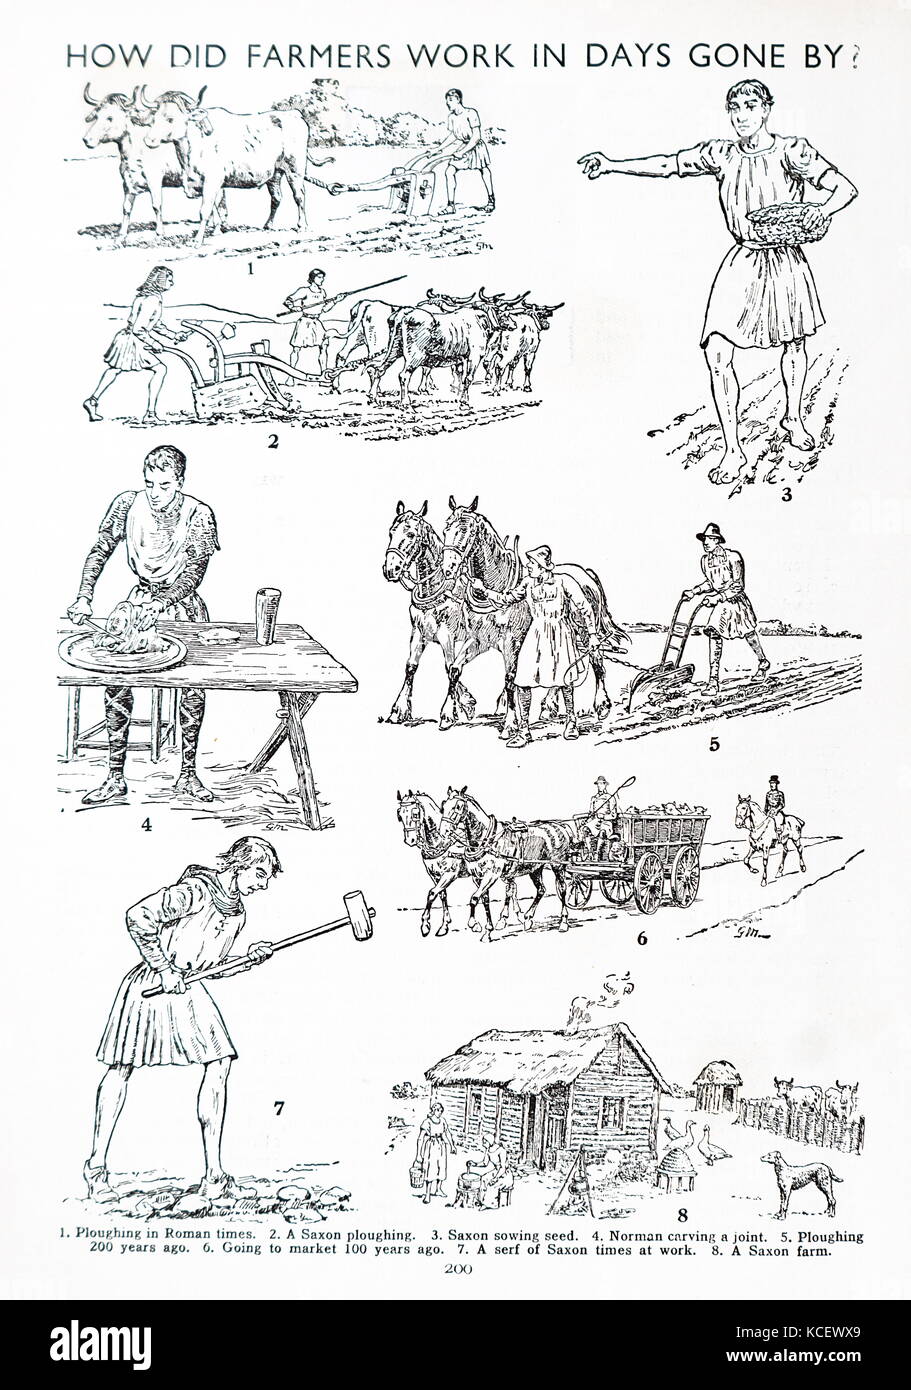 Illustration depicting farming in days gone by. 1. Ploughing in Roman times. 2. A Saxon ploughing. 3. Saxon sowing seed. 4. Norman carving a joint. 5. Ploughing 200 years ago. 6. Going to market 100 years ago. 7. A serf of Saxon times at work. 8. A Saxon farm. Dated 19th Century Stock Photo